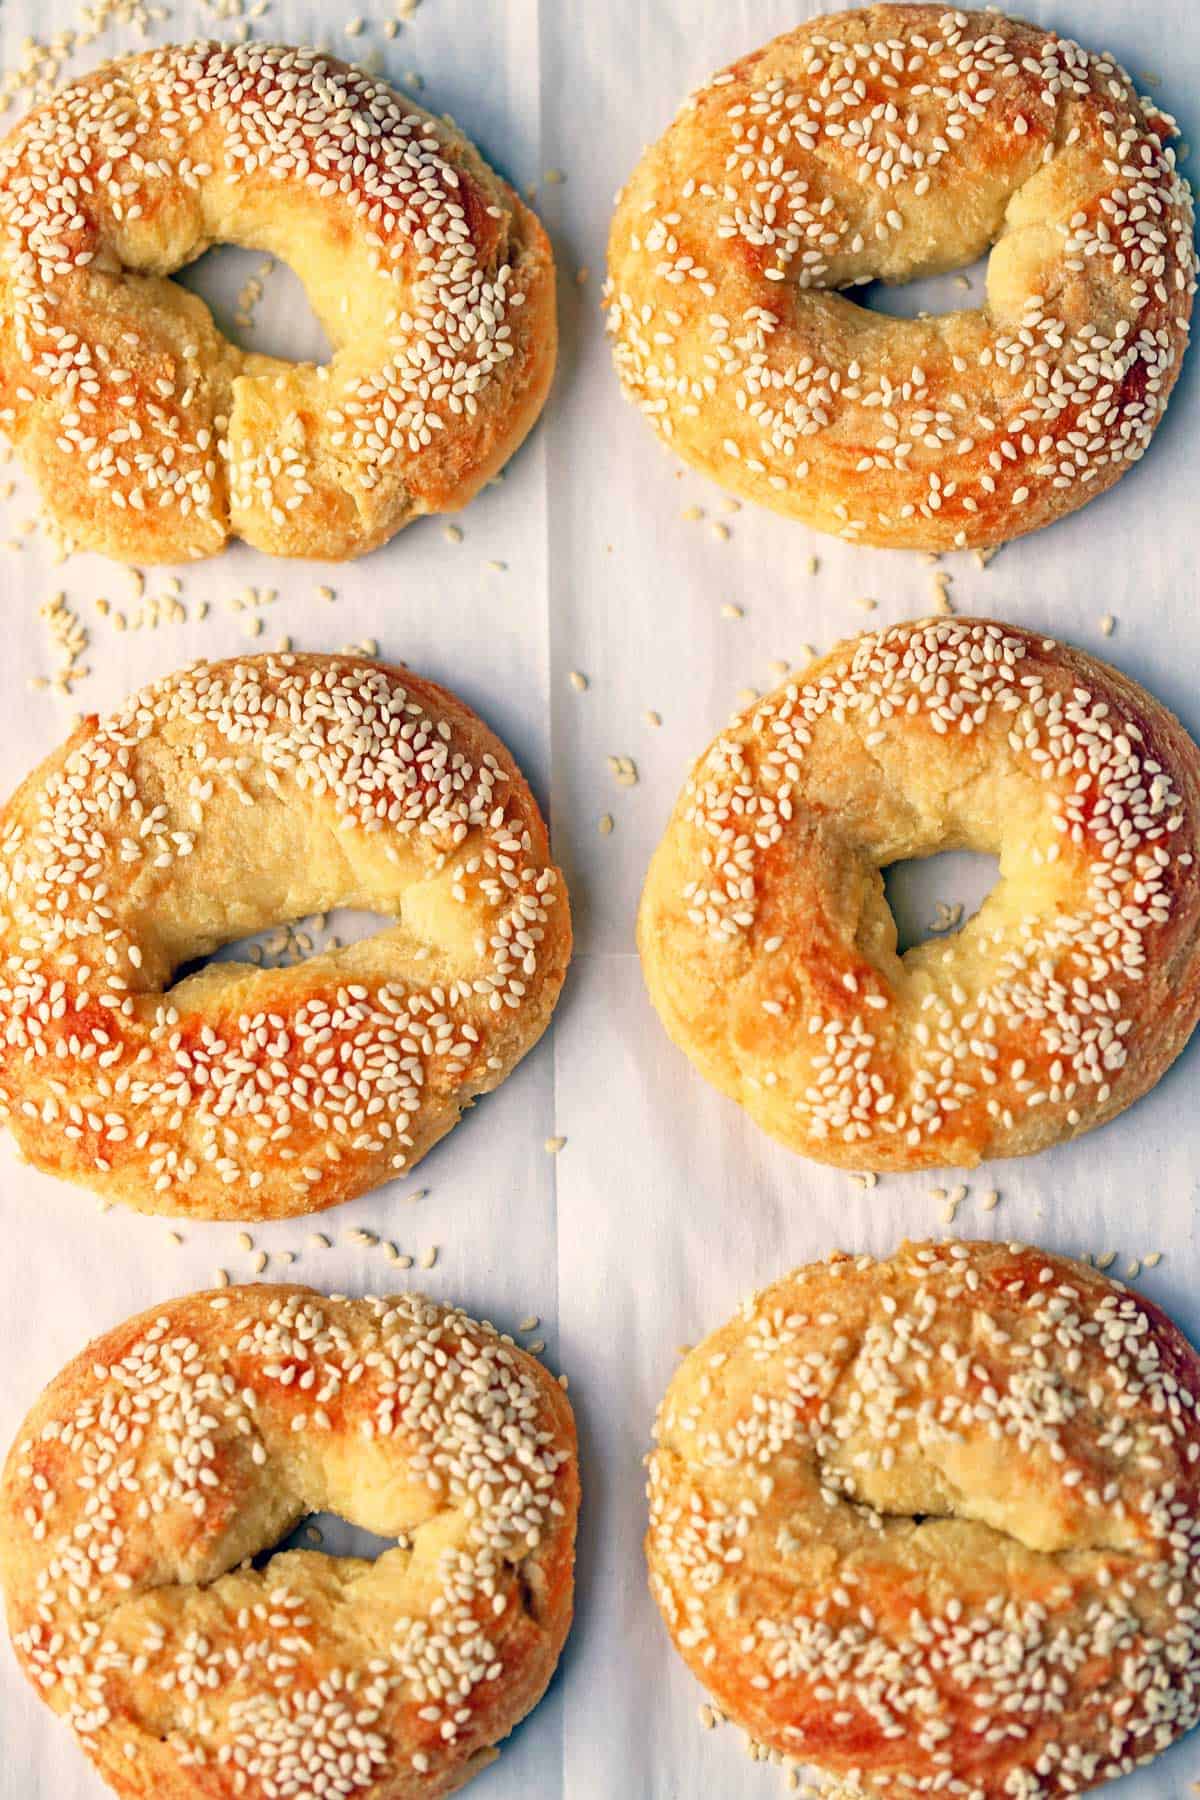 Keto bagels topped with sesame seeds.